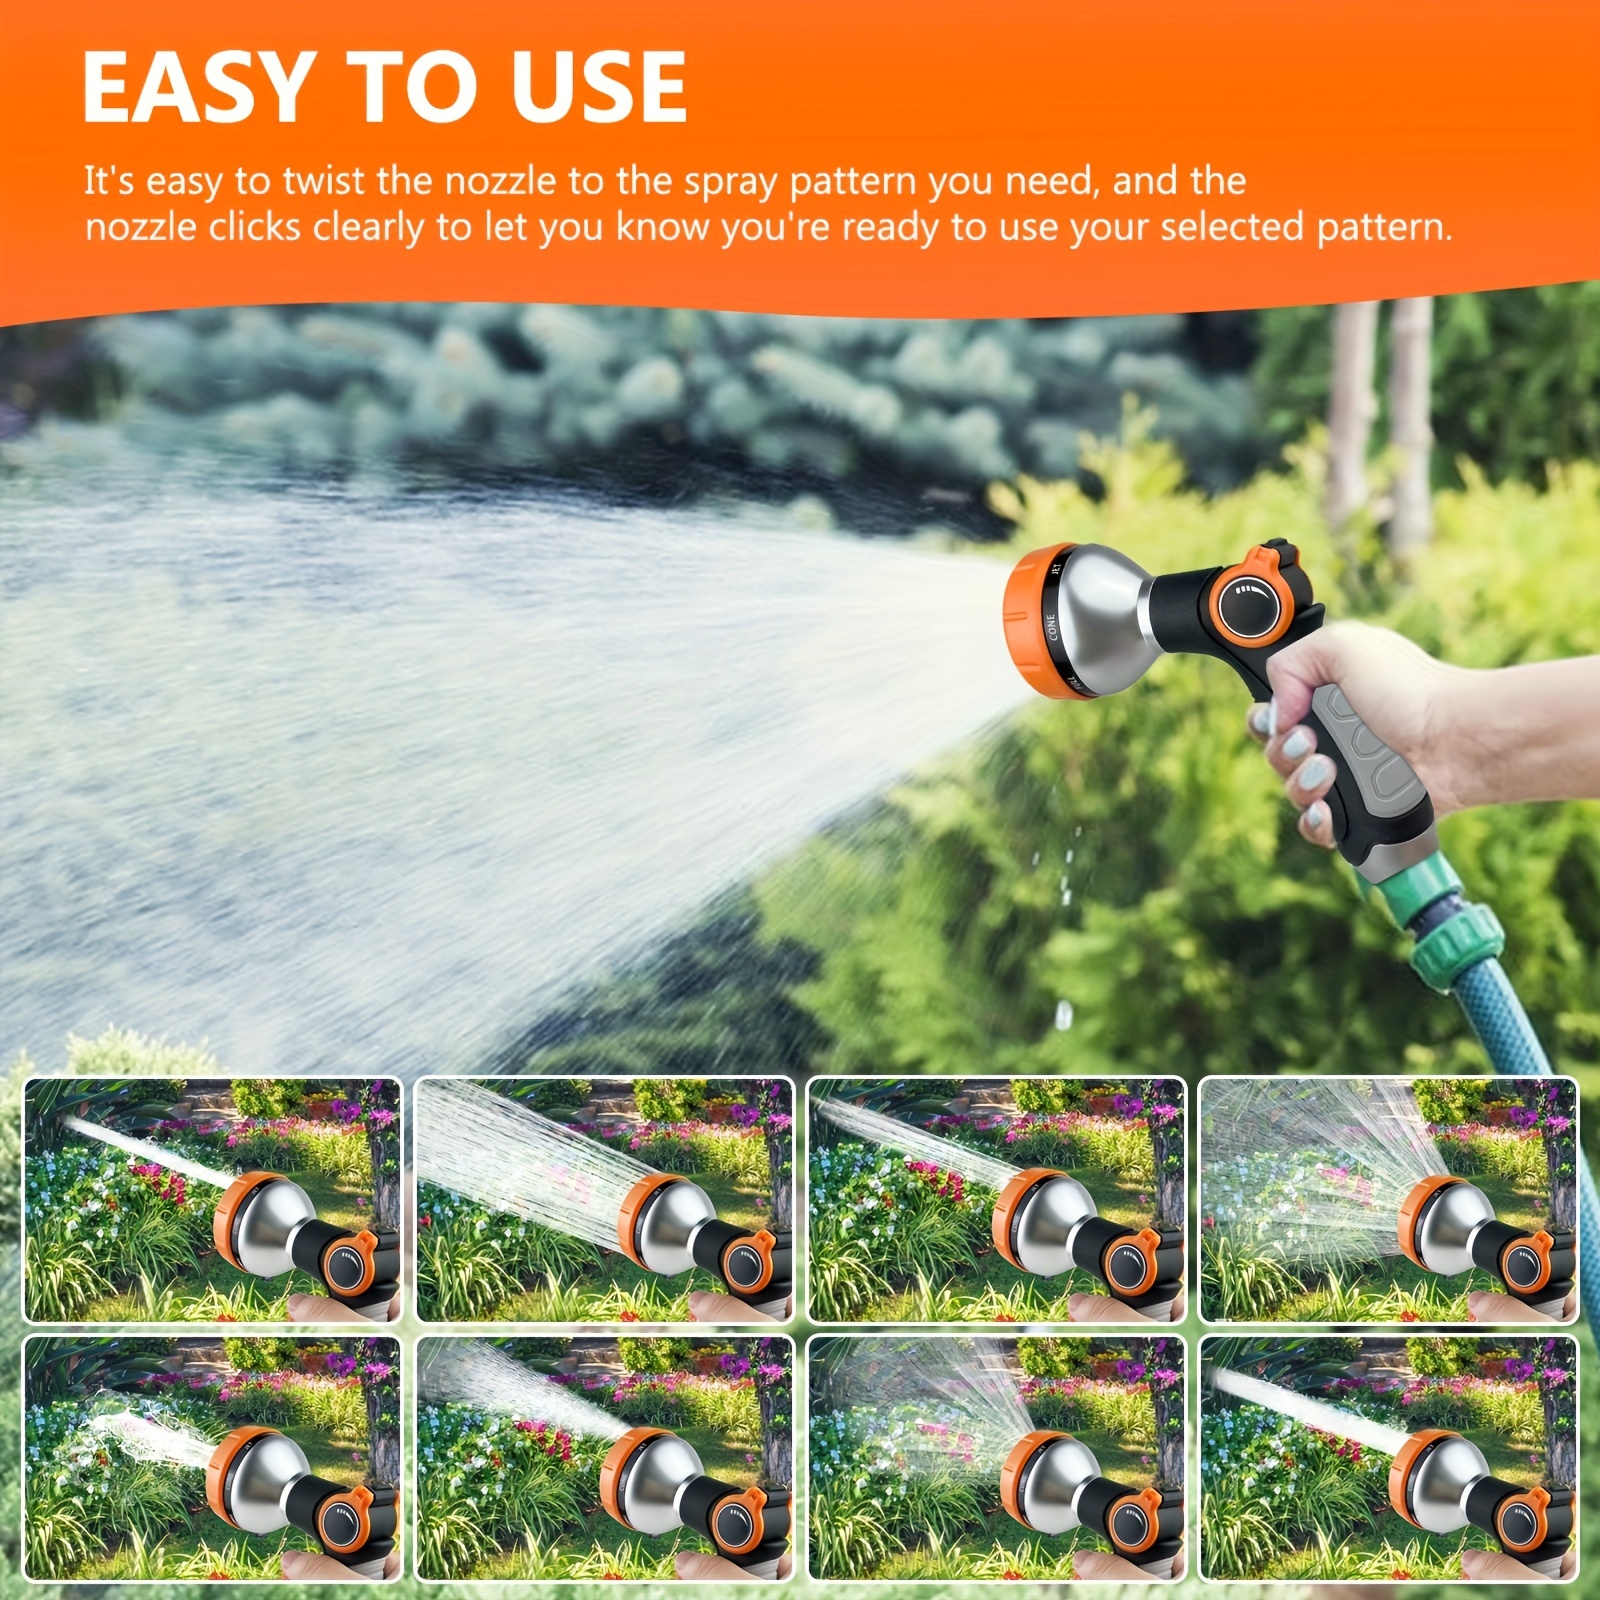 

1pc Garden Hose Nozzle, Heavy Duty Water Hose Nozzle, 8 Adjustable Watering Patterns Sprayer, Thumb Control, On-off Valve For Easy Water Control, Nozzle Sprayer For Watering Garden Showering Pets